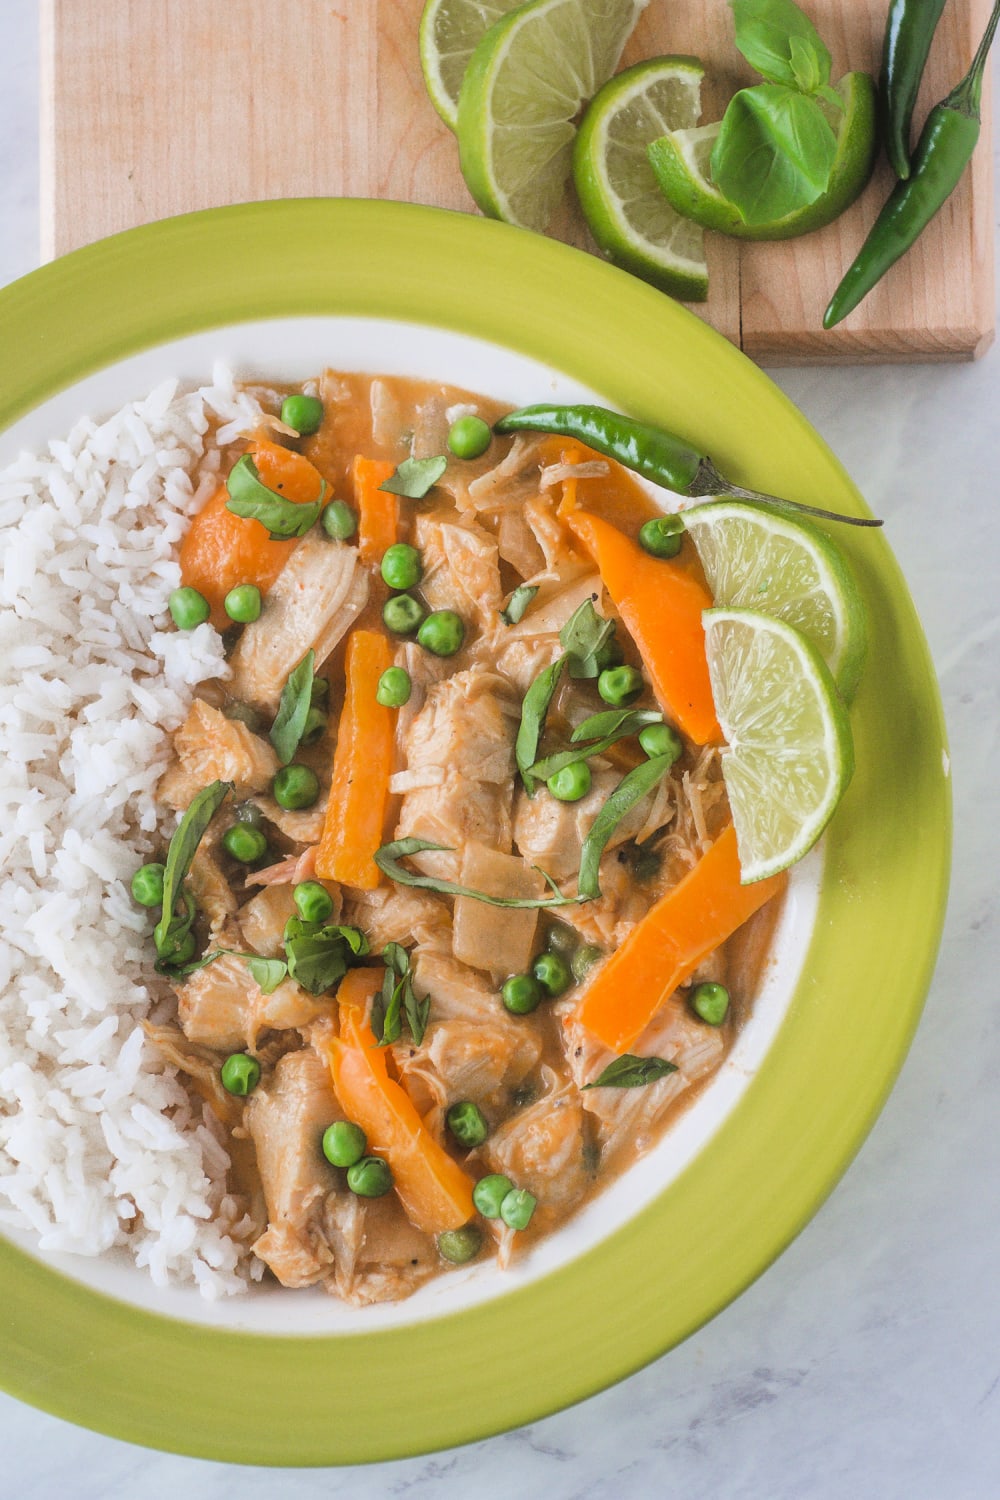 This Thai Red Chicken Curry is a quick and easy one pot meal, with tender chicken and orange peppers simmered with red curry paste and coconut milk. This creamy weeknight meal can be made in less than 30 minutes for a restaurant style dish that is better than take out! #thai #curry